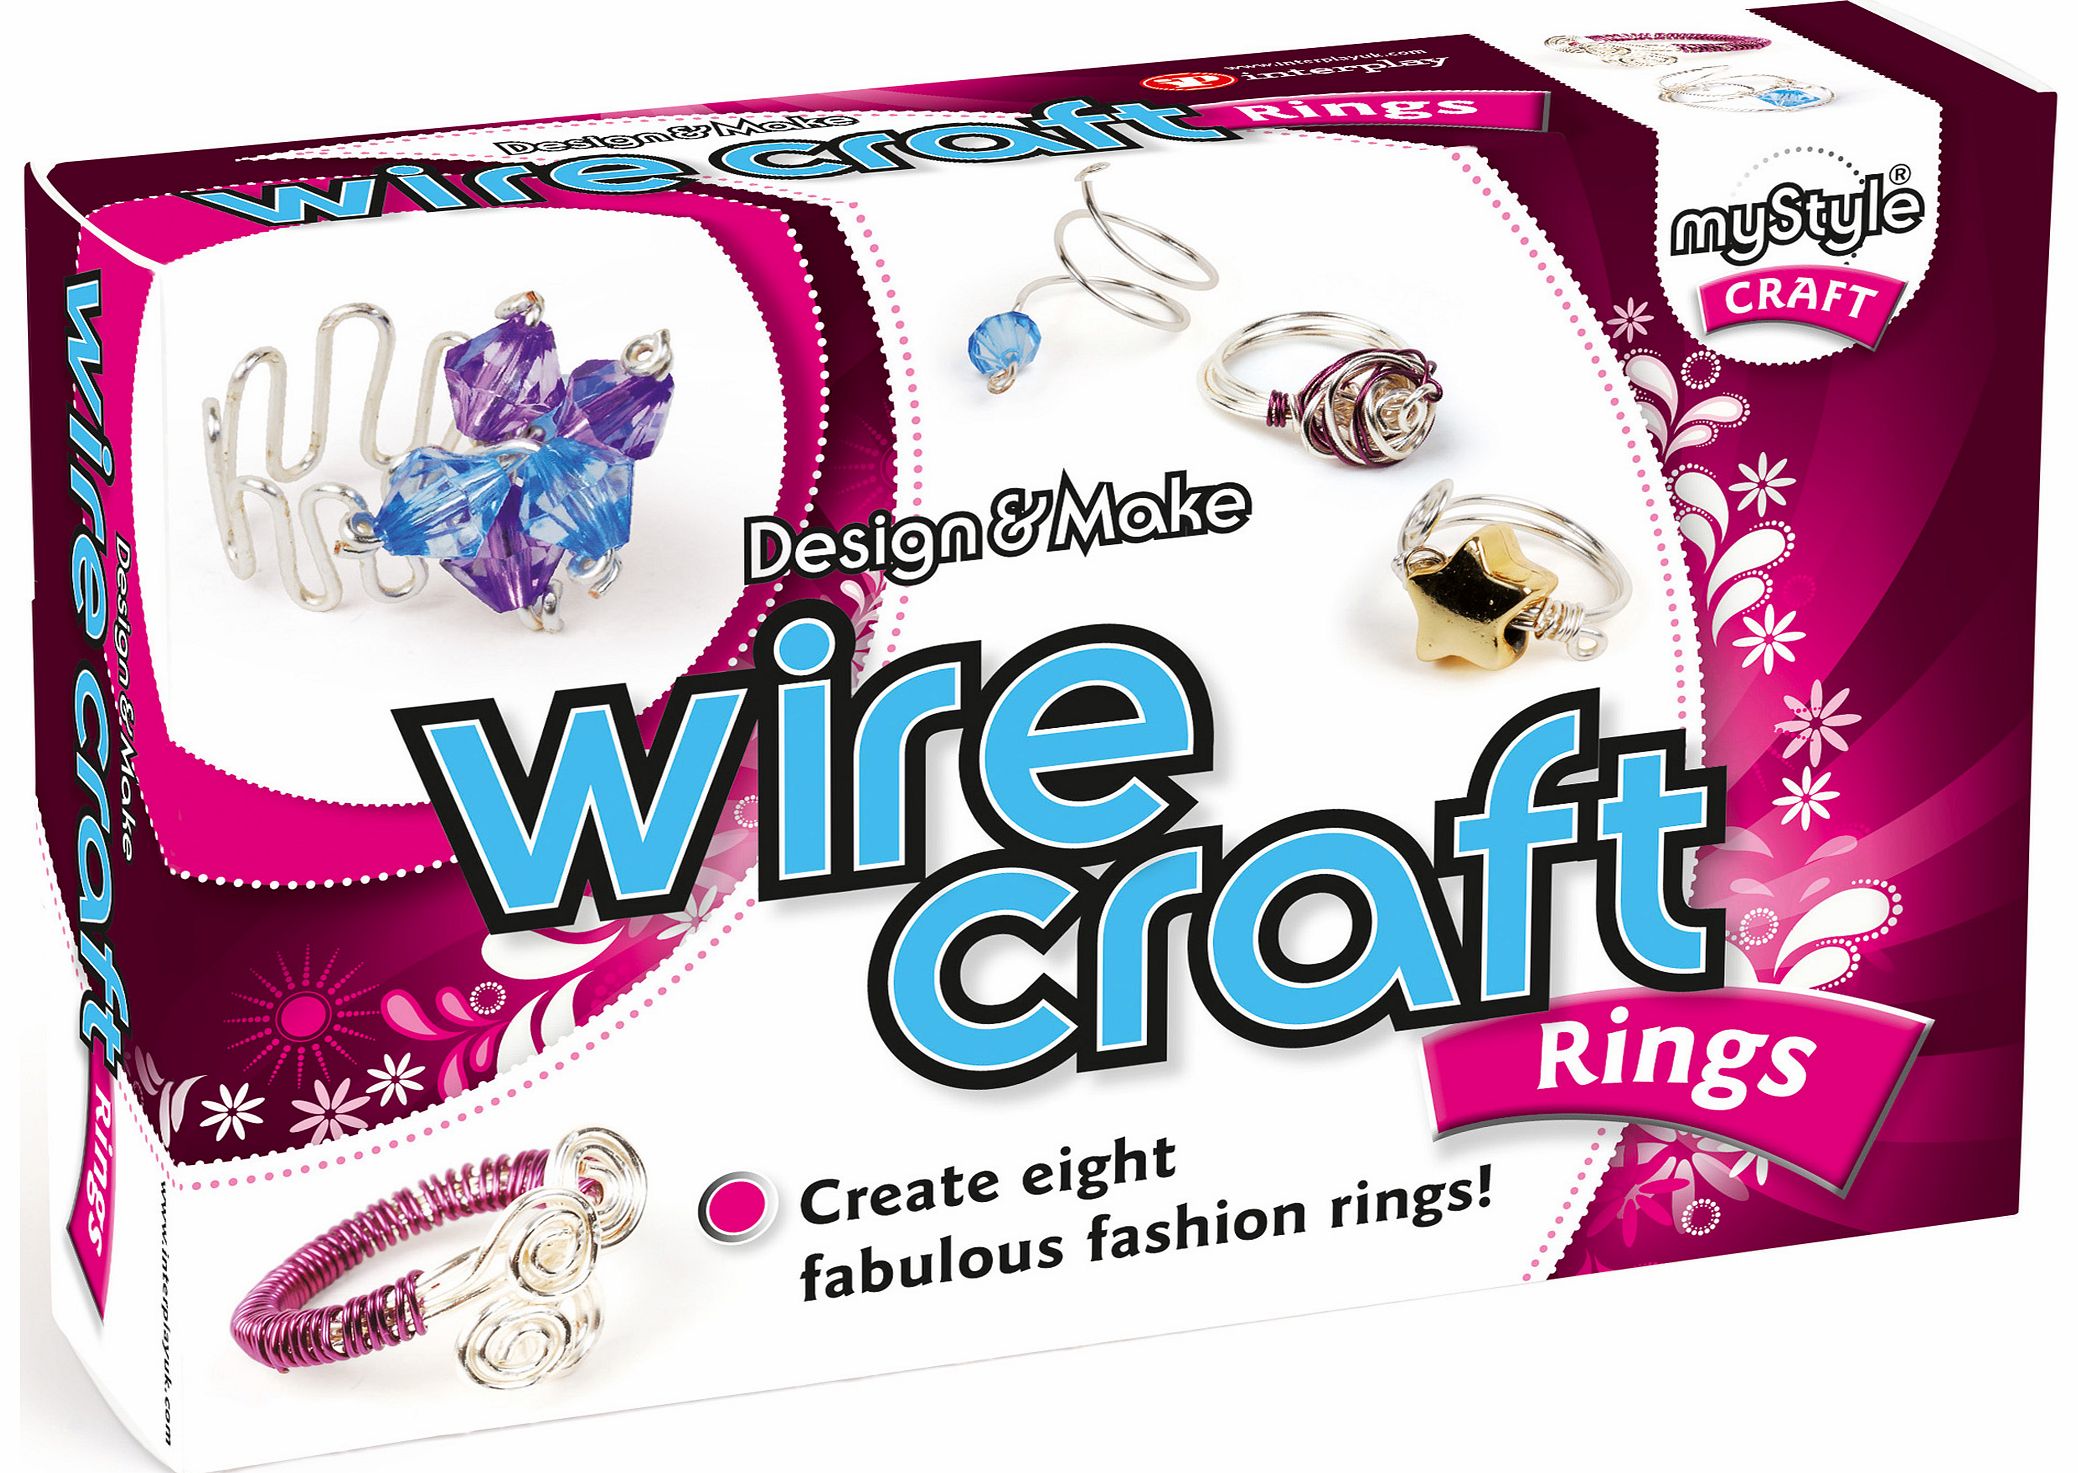 myStyle Wire Craft Rings